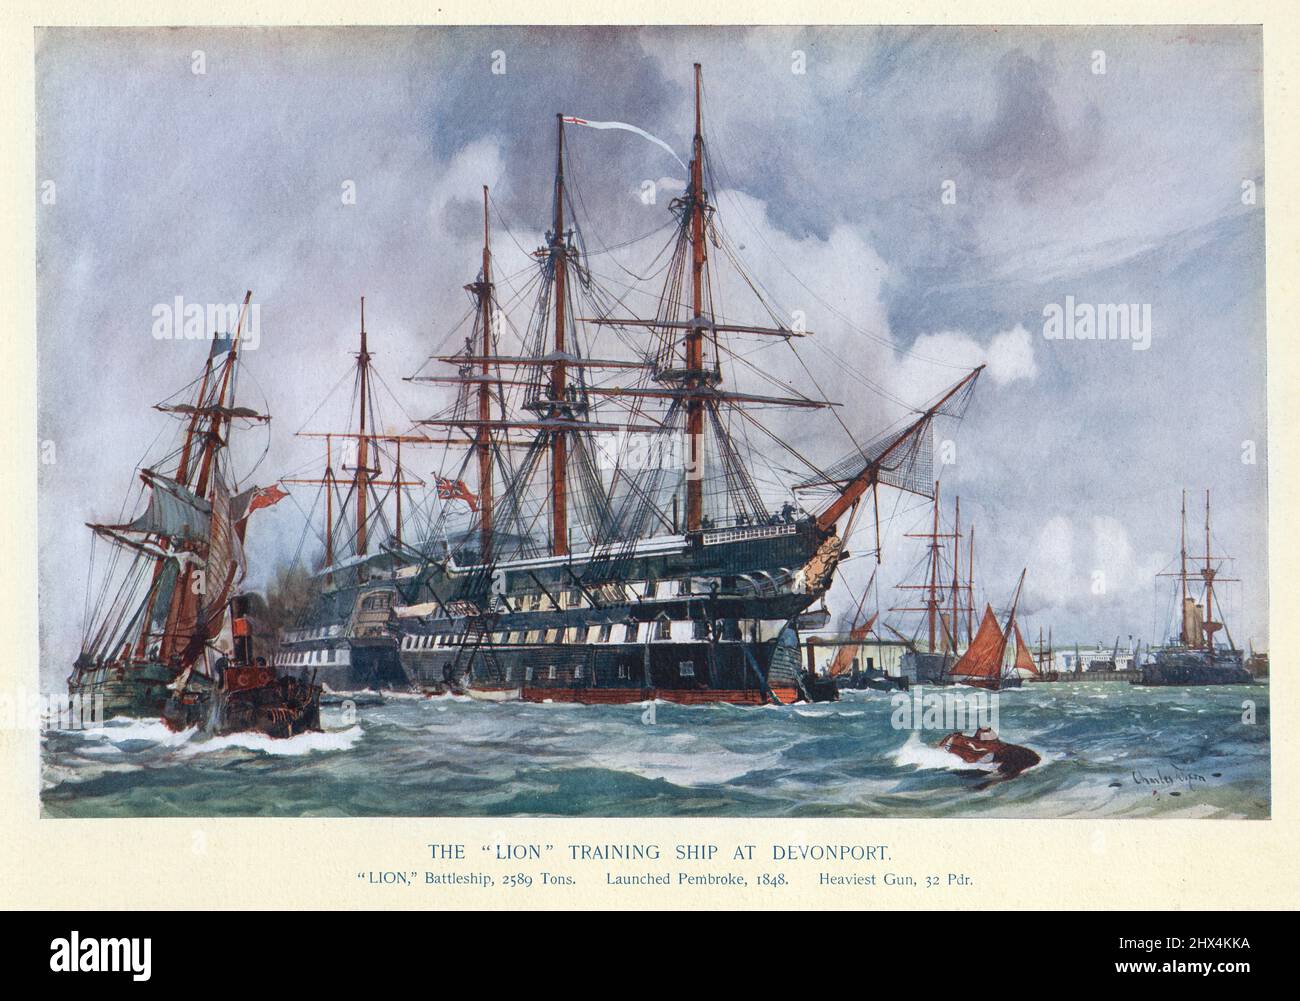 HMS Lion, Royal Navy training ship at Devonport, 19th Century. HMS Lion was a 80-gun second rate Vanguard-class ship of the line built for the Royal Navy in the 1840s. She was fitted with steam propulsion in 1858–1859. In 1871 Lion was converted into a training ship at HM Dockyard, Devonport. Stock Photo